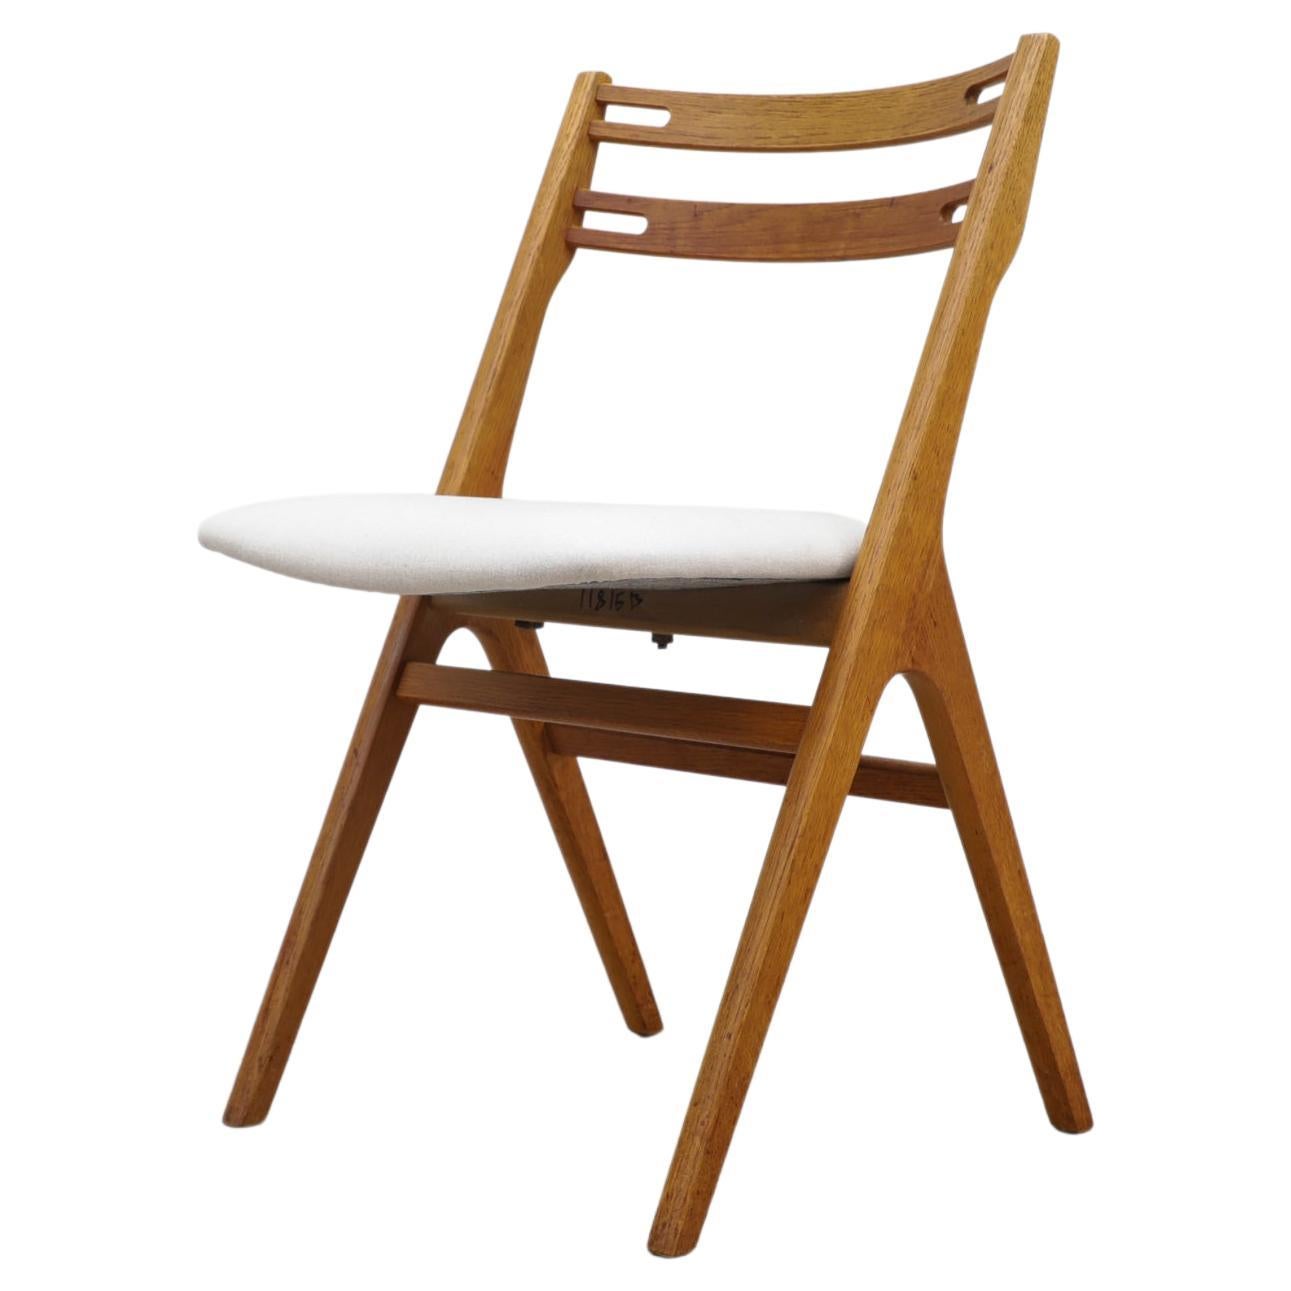 Single Hans Wegner Inspired Oak Dining Chair with Compass Legs and Bowed Back For Sale